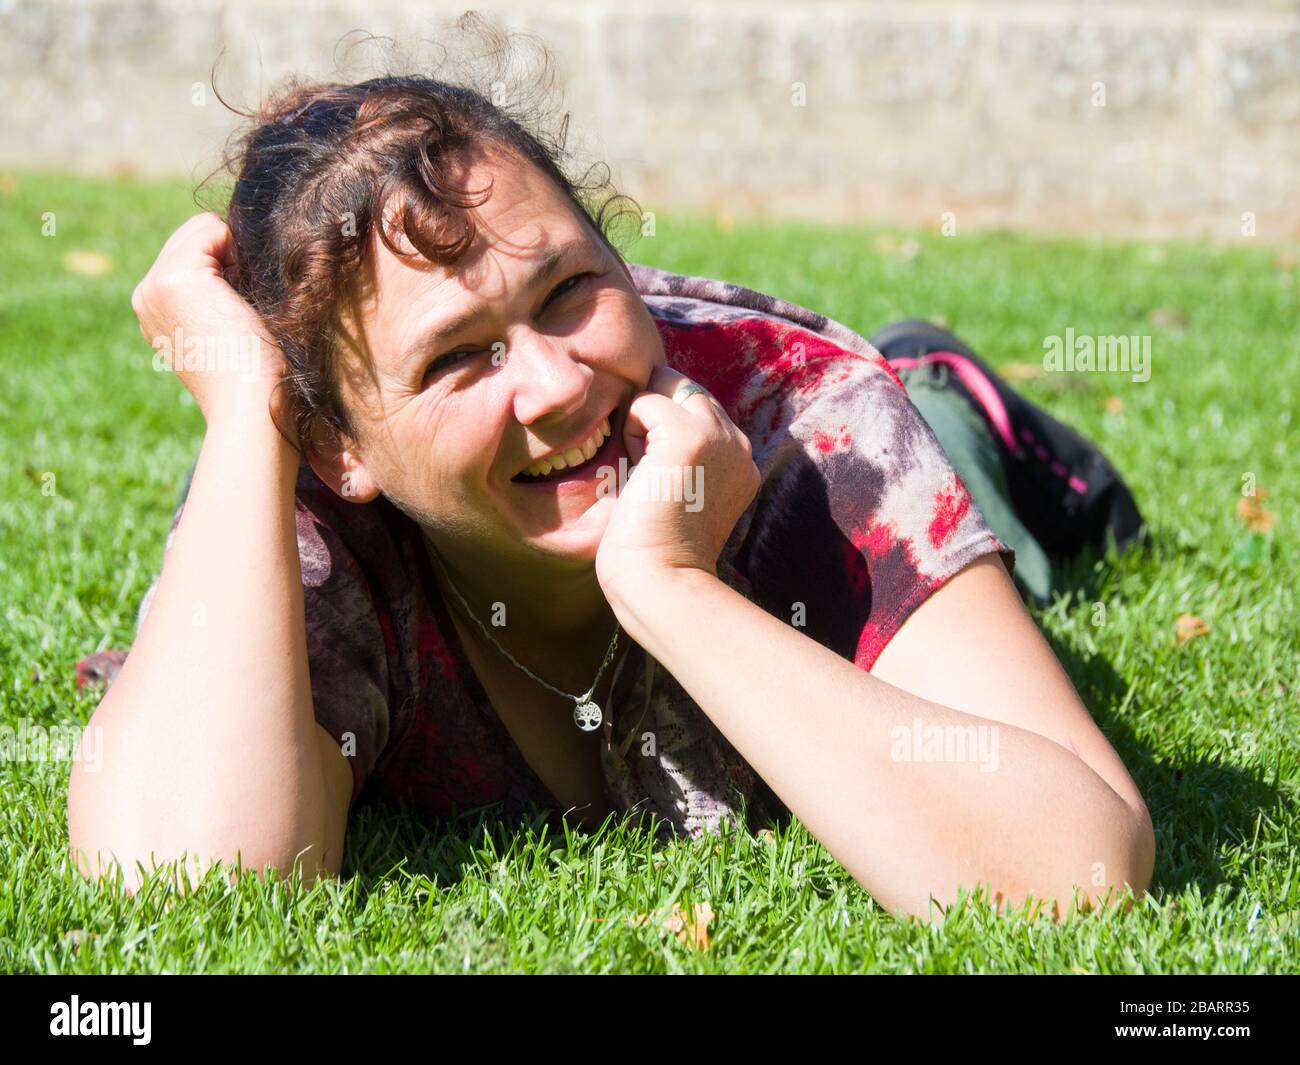 Middle aged woman laying on the grass in the sunshine, UK Stock Photo